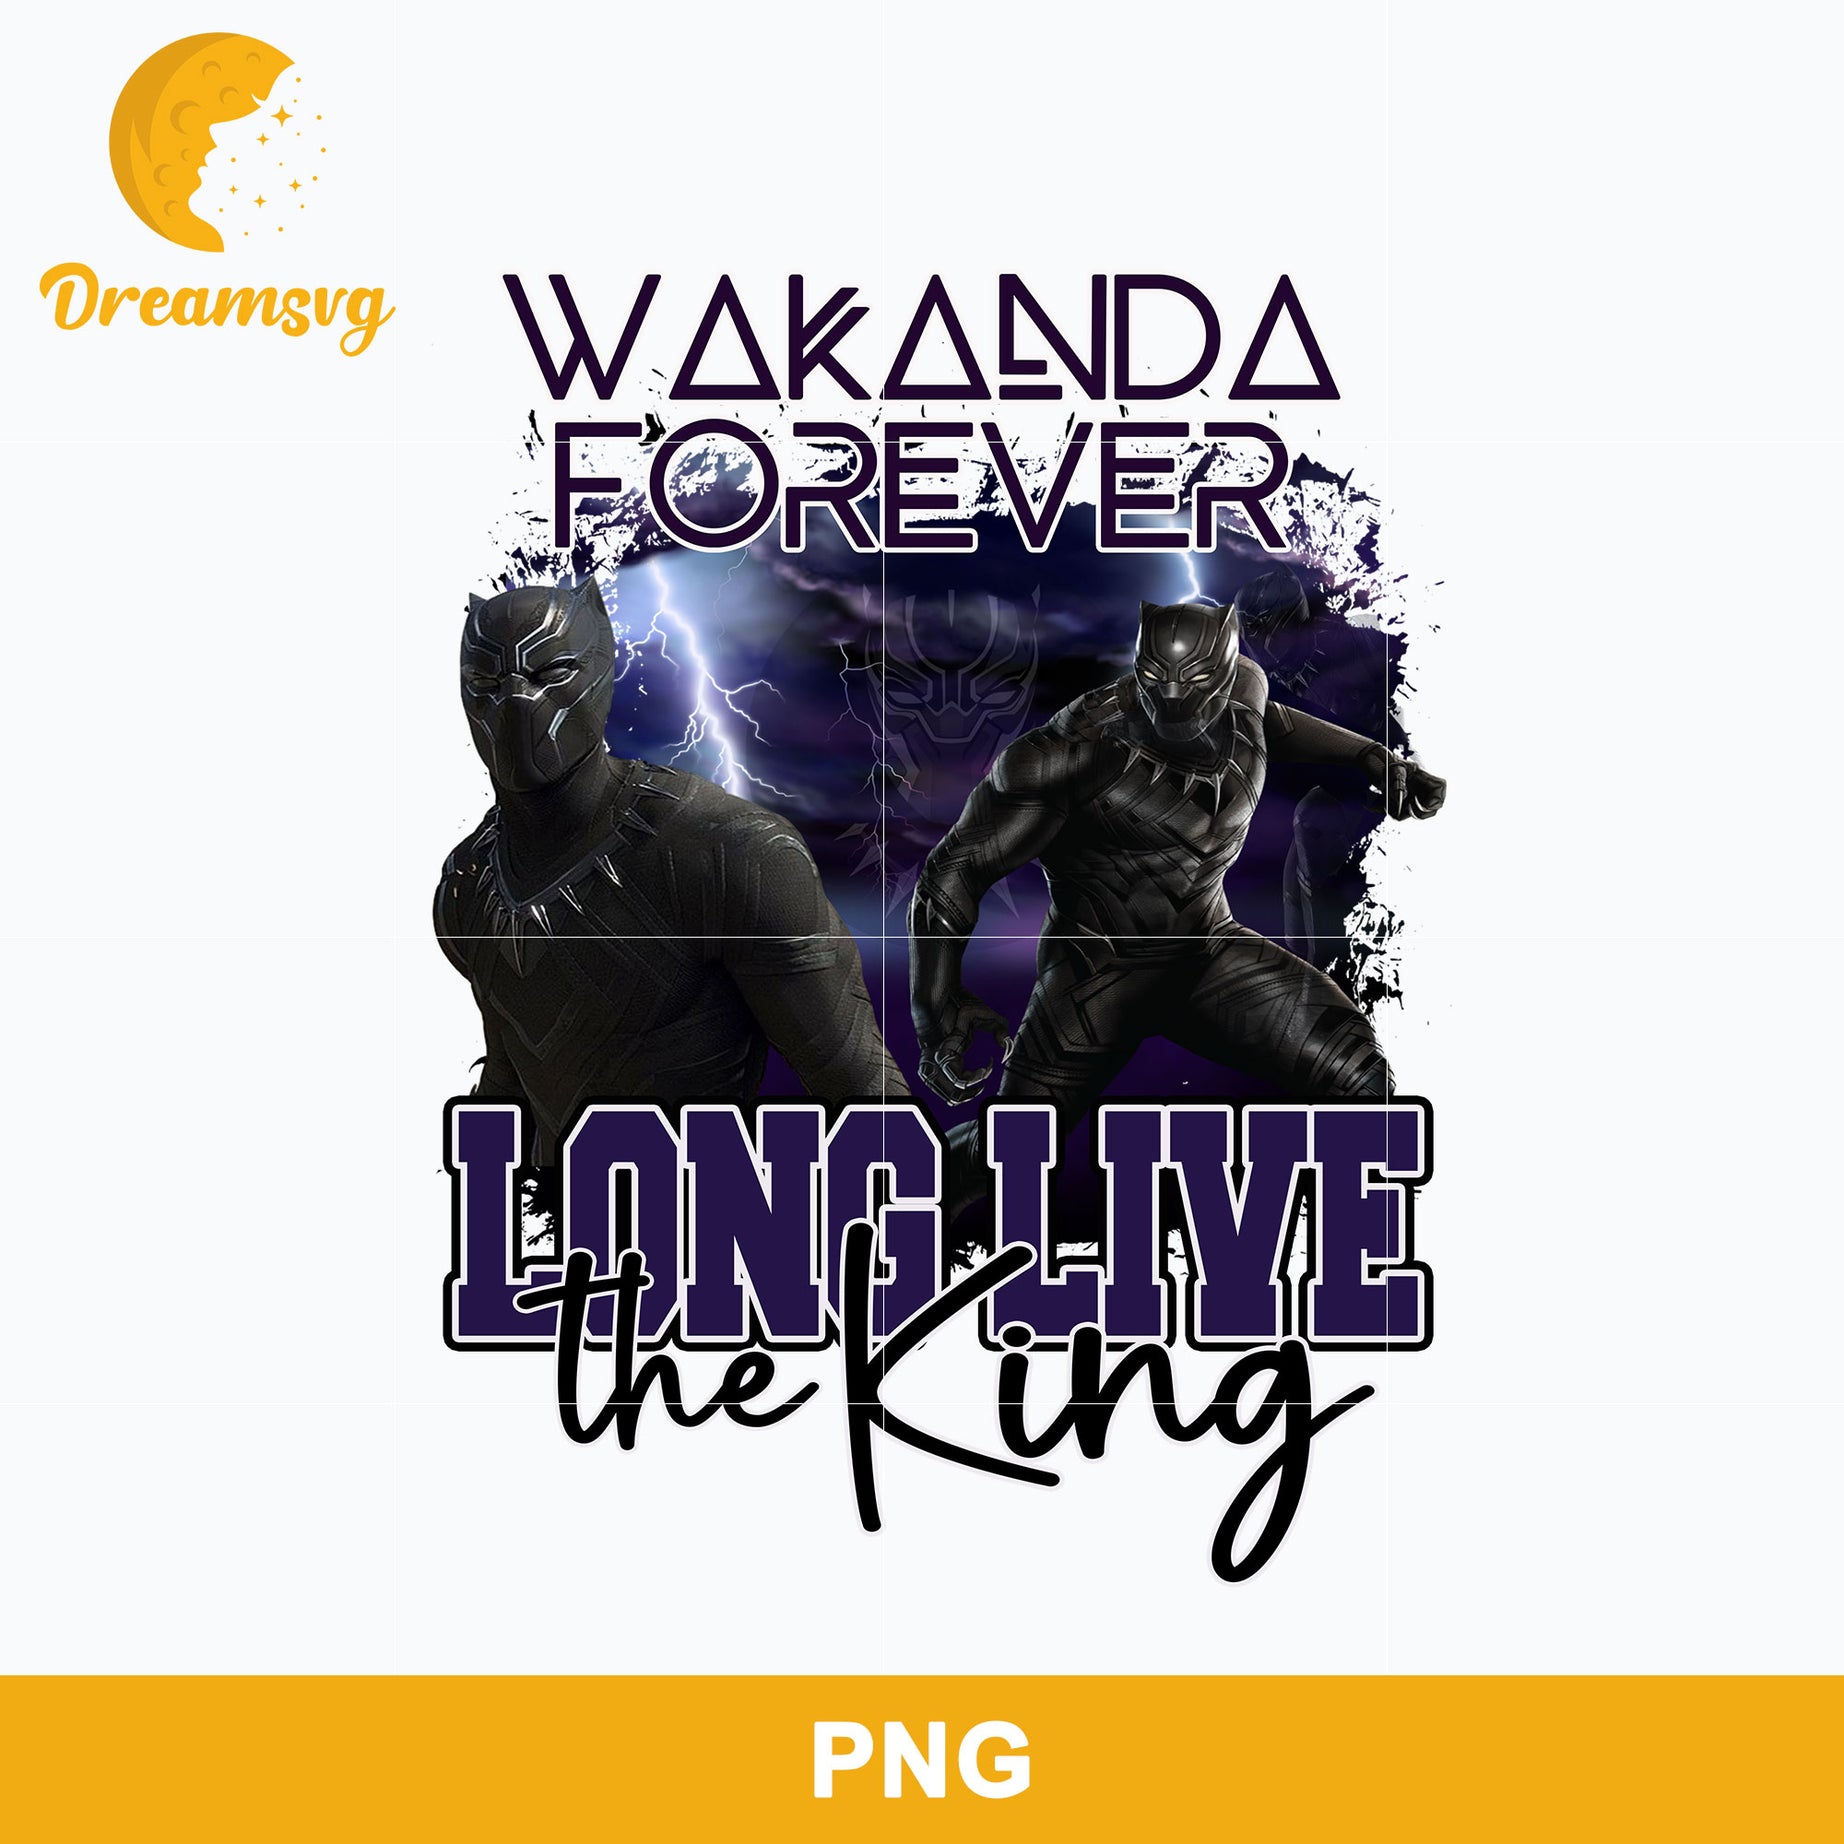 Long Live The King PNG, Black Panther Wakanda Forever PNG, Marvel PNG